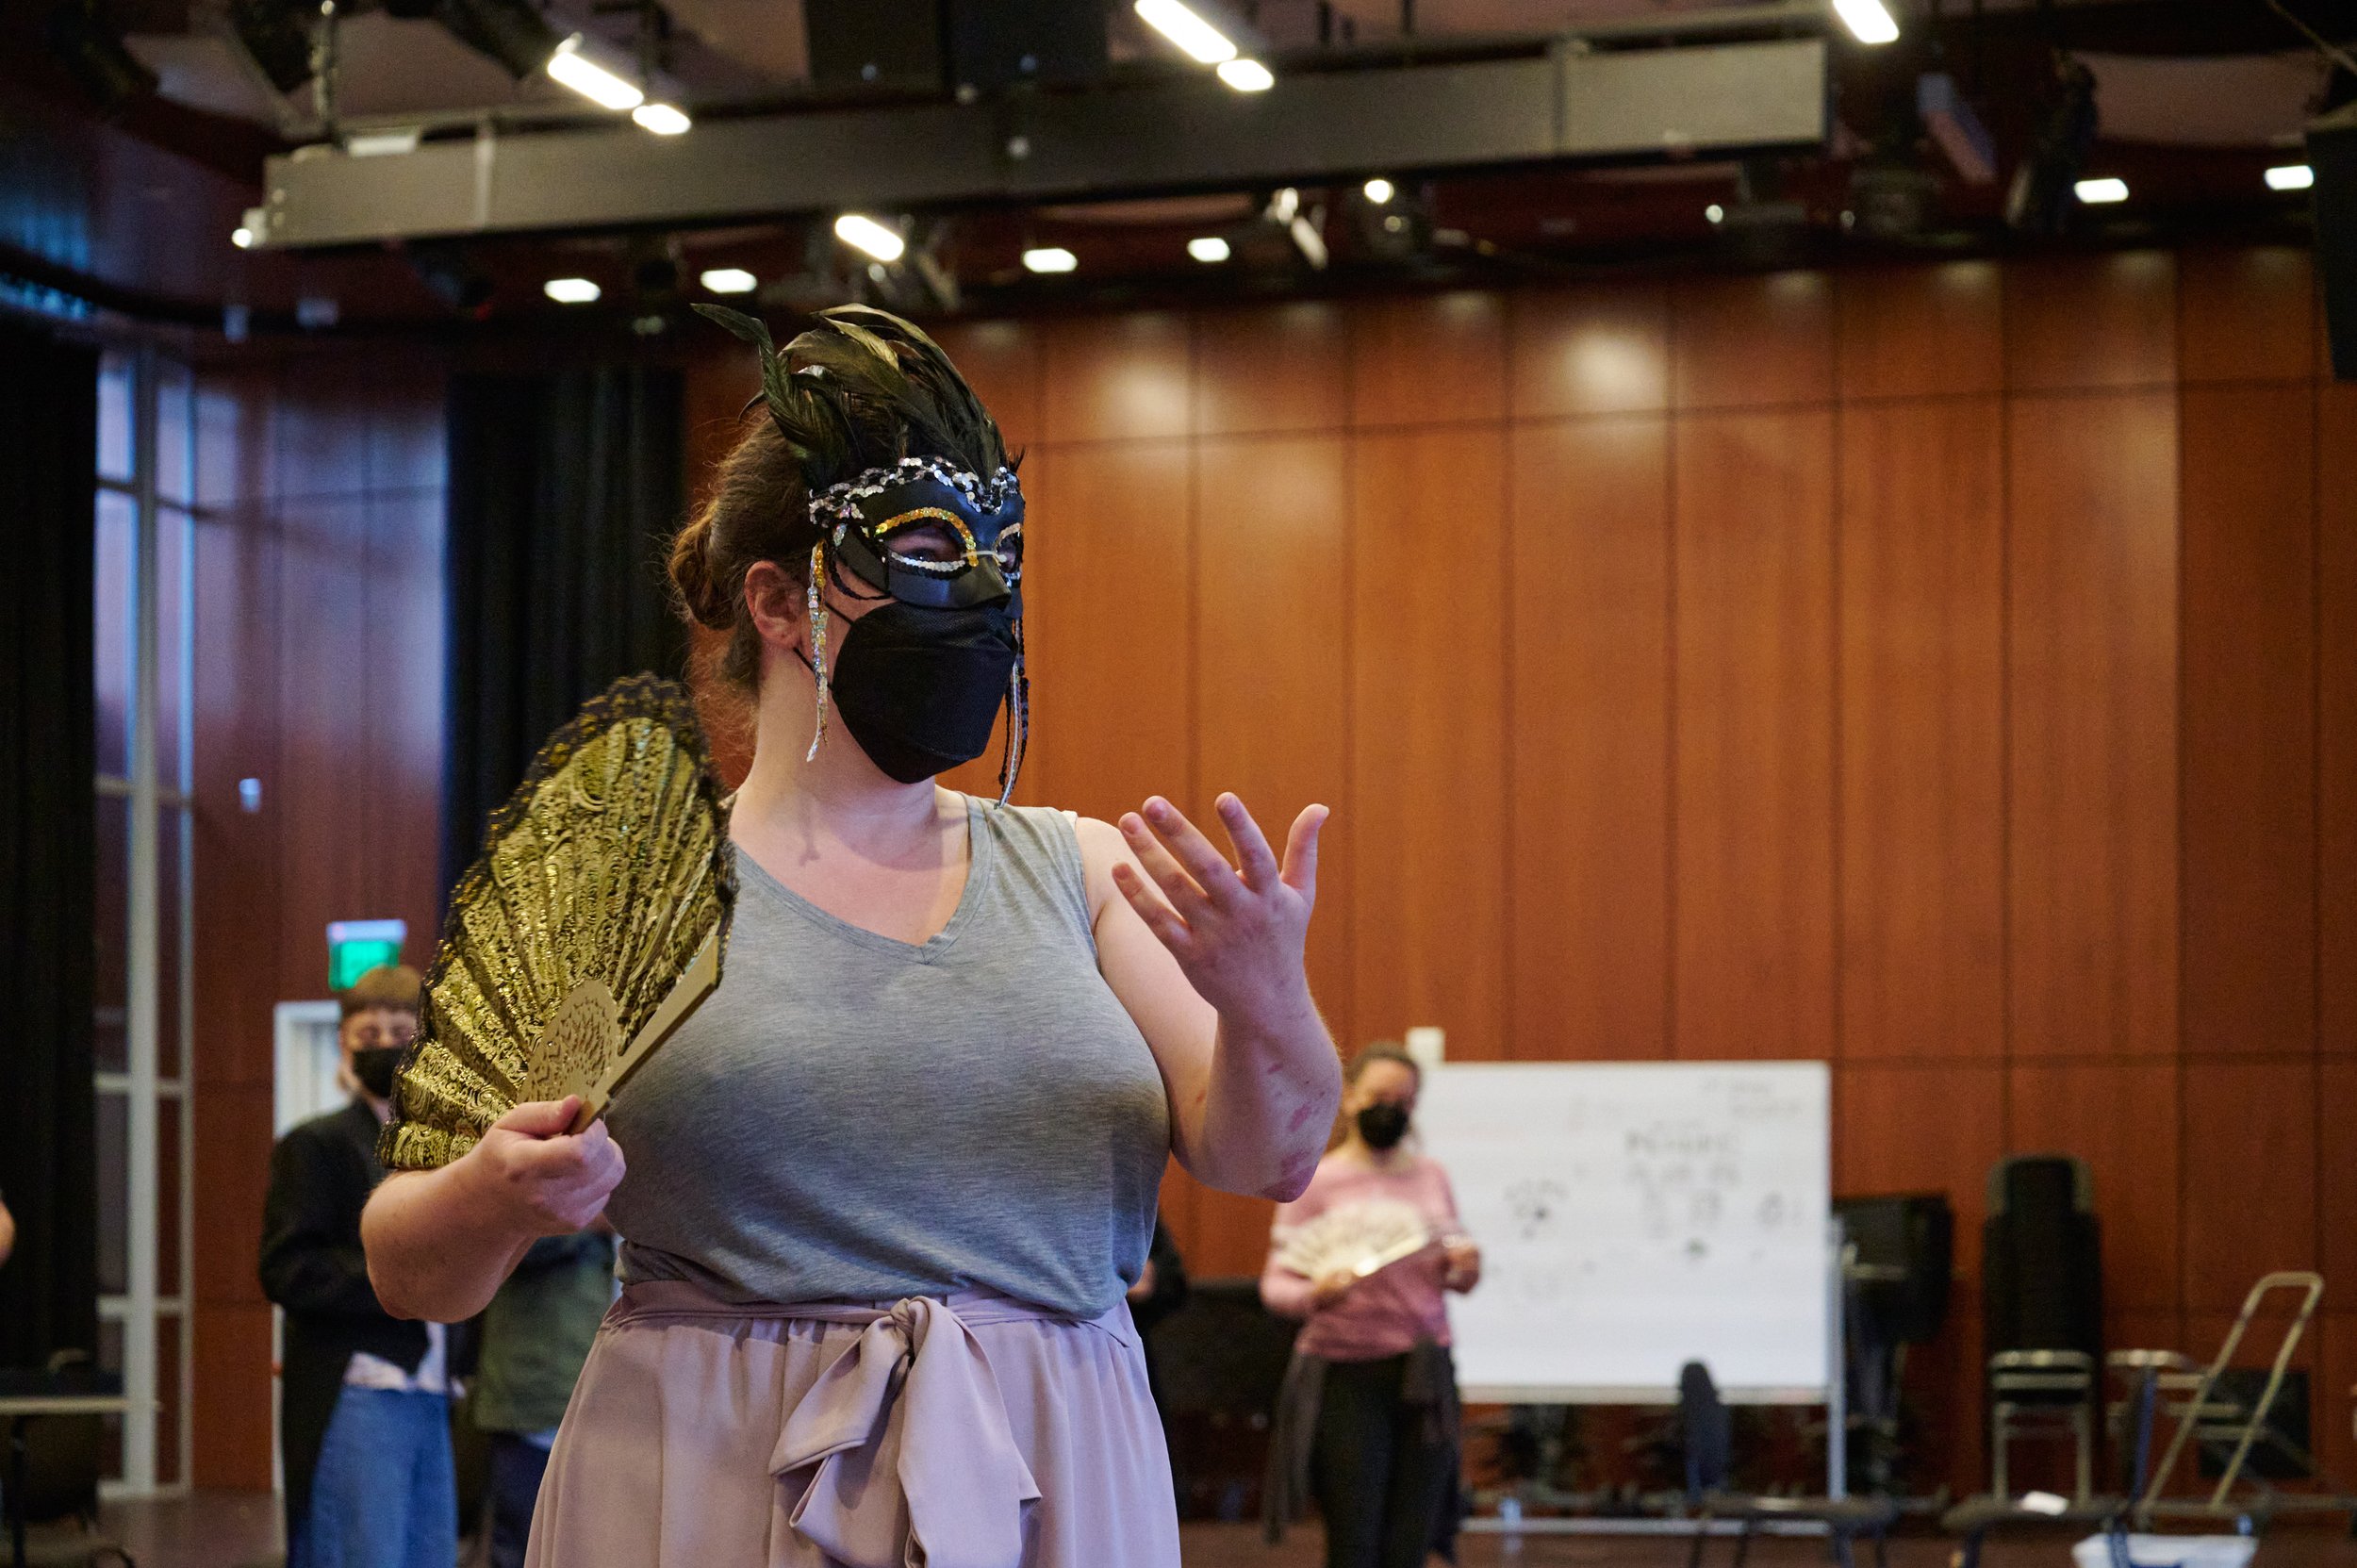  Rose Lodewick during rehearsal of the Santa Monica College Opera Theatre production of "Die Fledermaus" at the SMC Performing Arts Center on Sunday, May 15, 2022, in Santa Monica, Calif. (Nicholas McCall | The Corsair) 